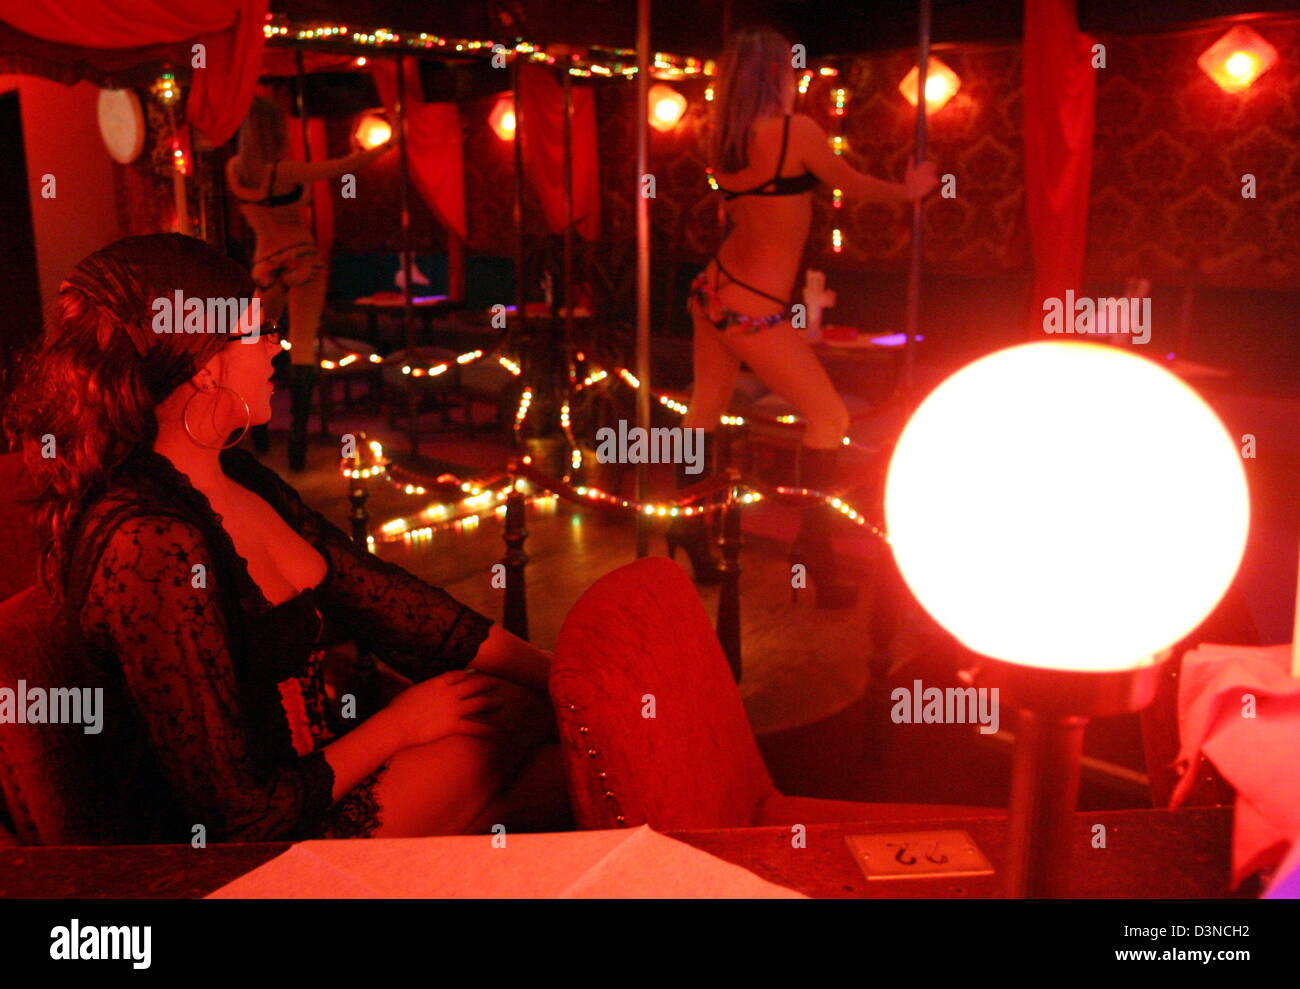 A young woman dances in a red lit tabledance club located on the Reeperbahn amusement street in Hamburg, Germany, Tuesday night, 28 March 2006. The Reeperbahn is considered the longest amusement street in the world. Photo: Kay Nietfeld Stock Photo